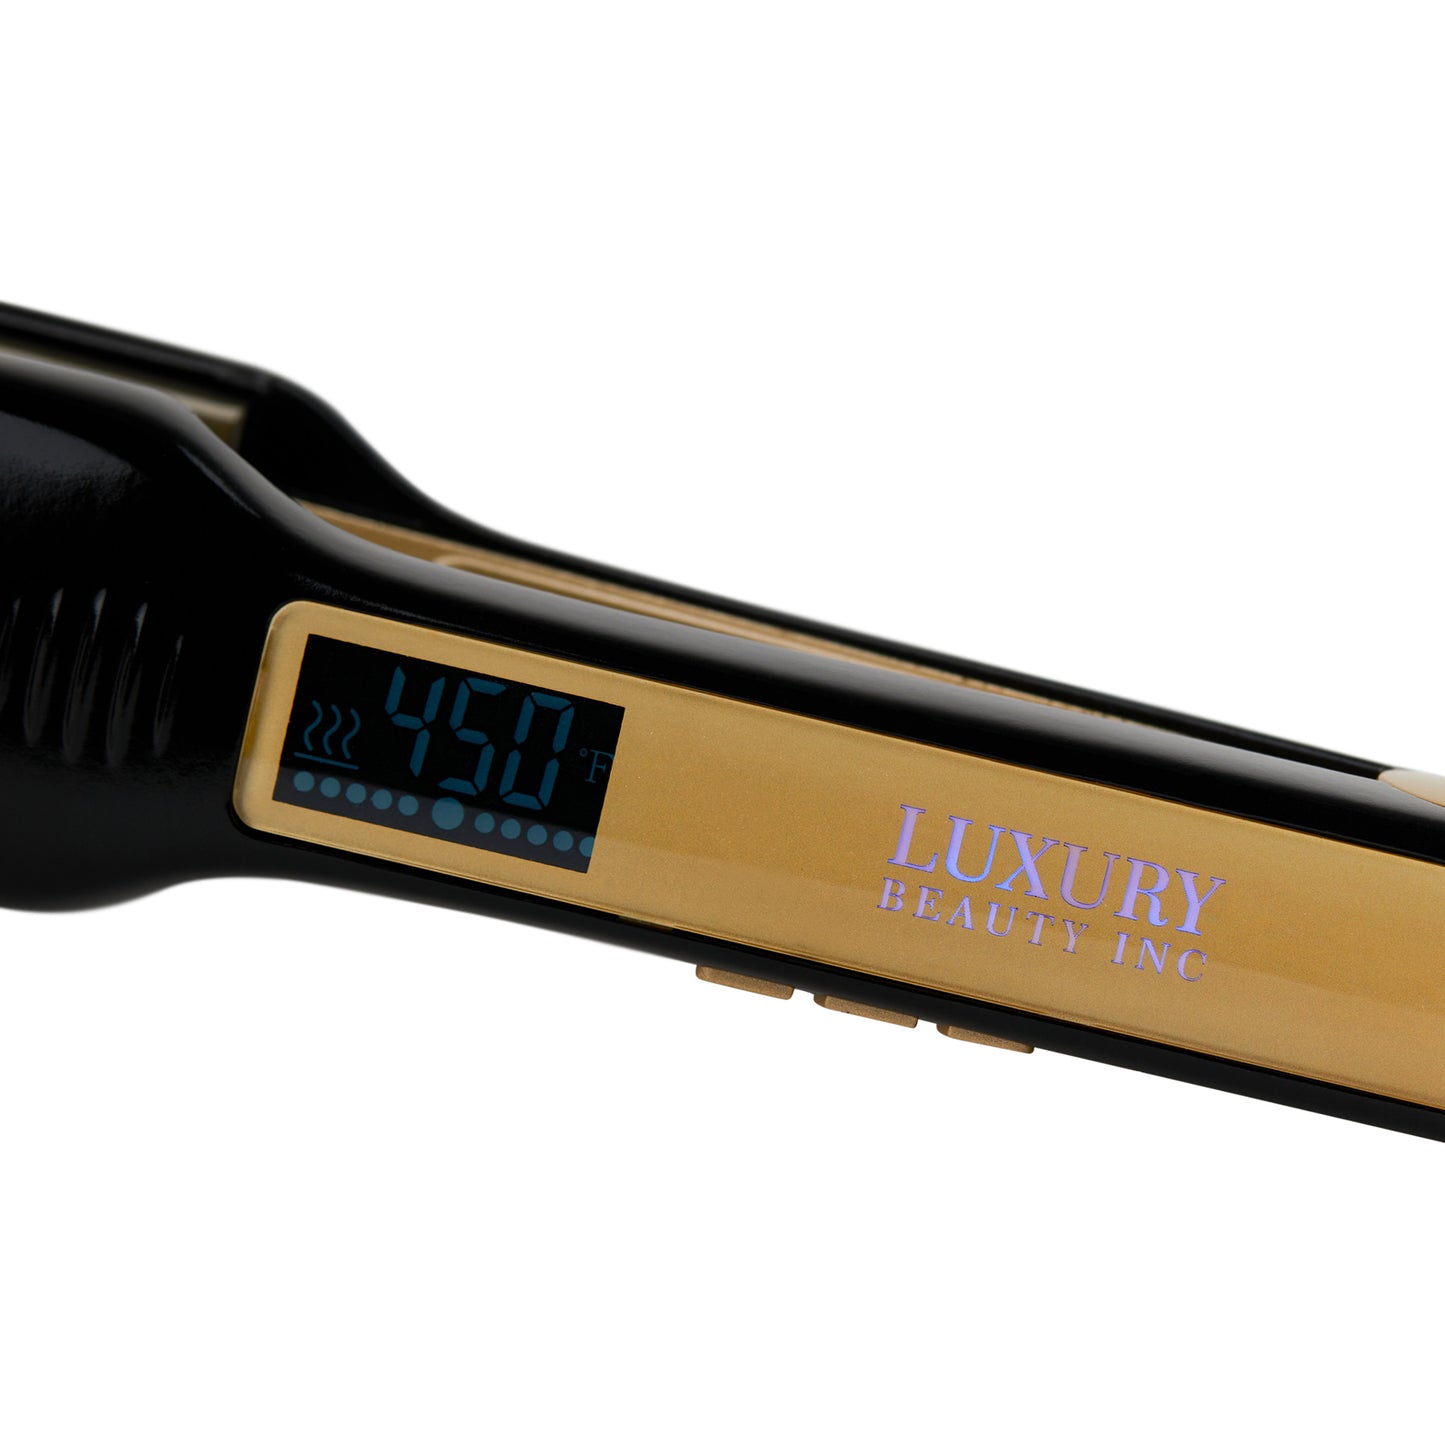 Professional Titanium 1.75Inch Flat Iron Hair Straightener & 2-in-1 Hair Styler with Digital LCD Display, Dual Voltage Instant Heating for Professional Straightening and Curling.